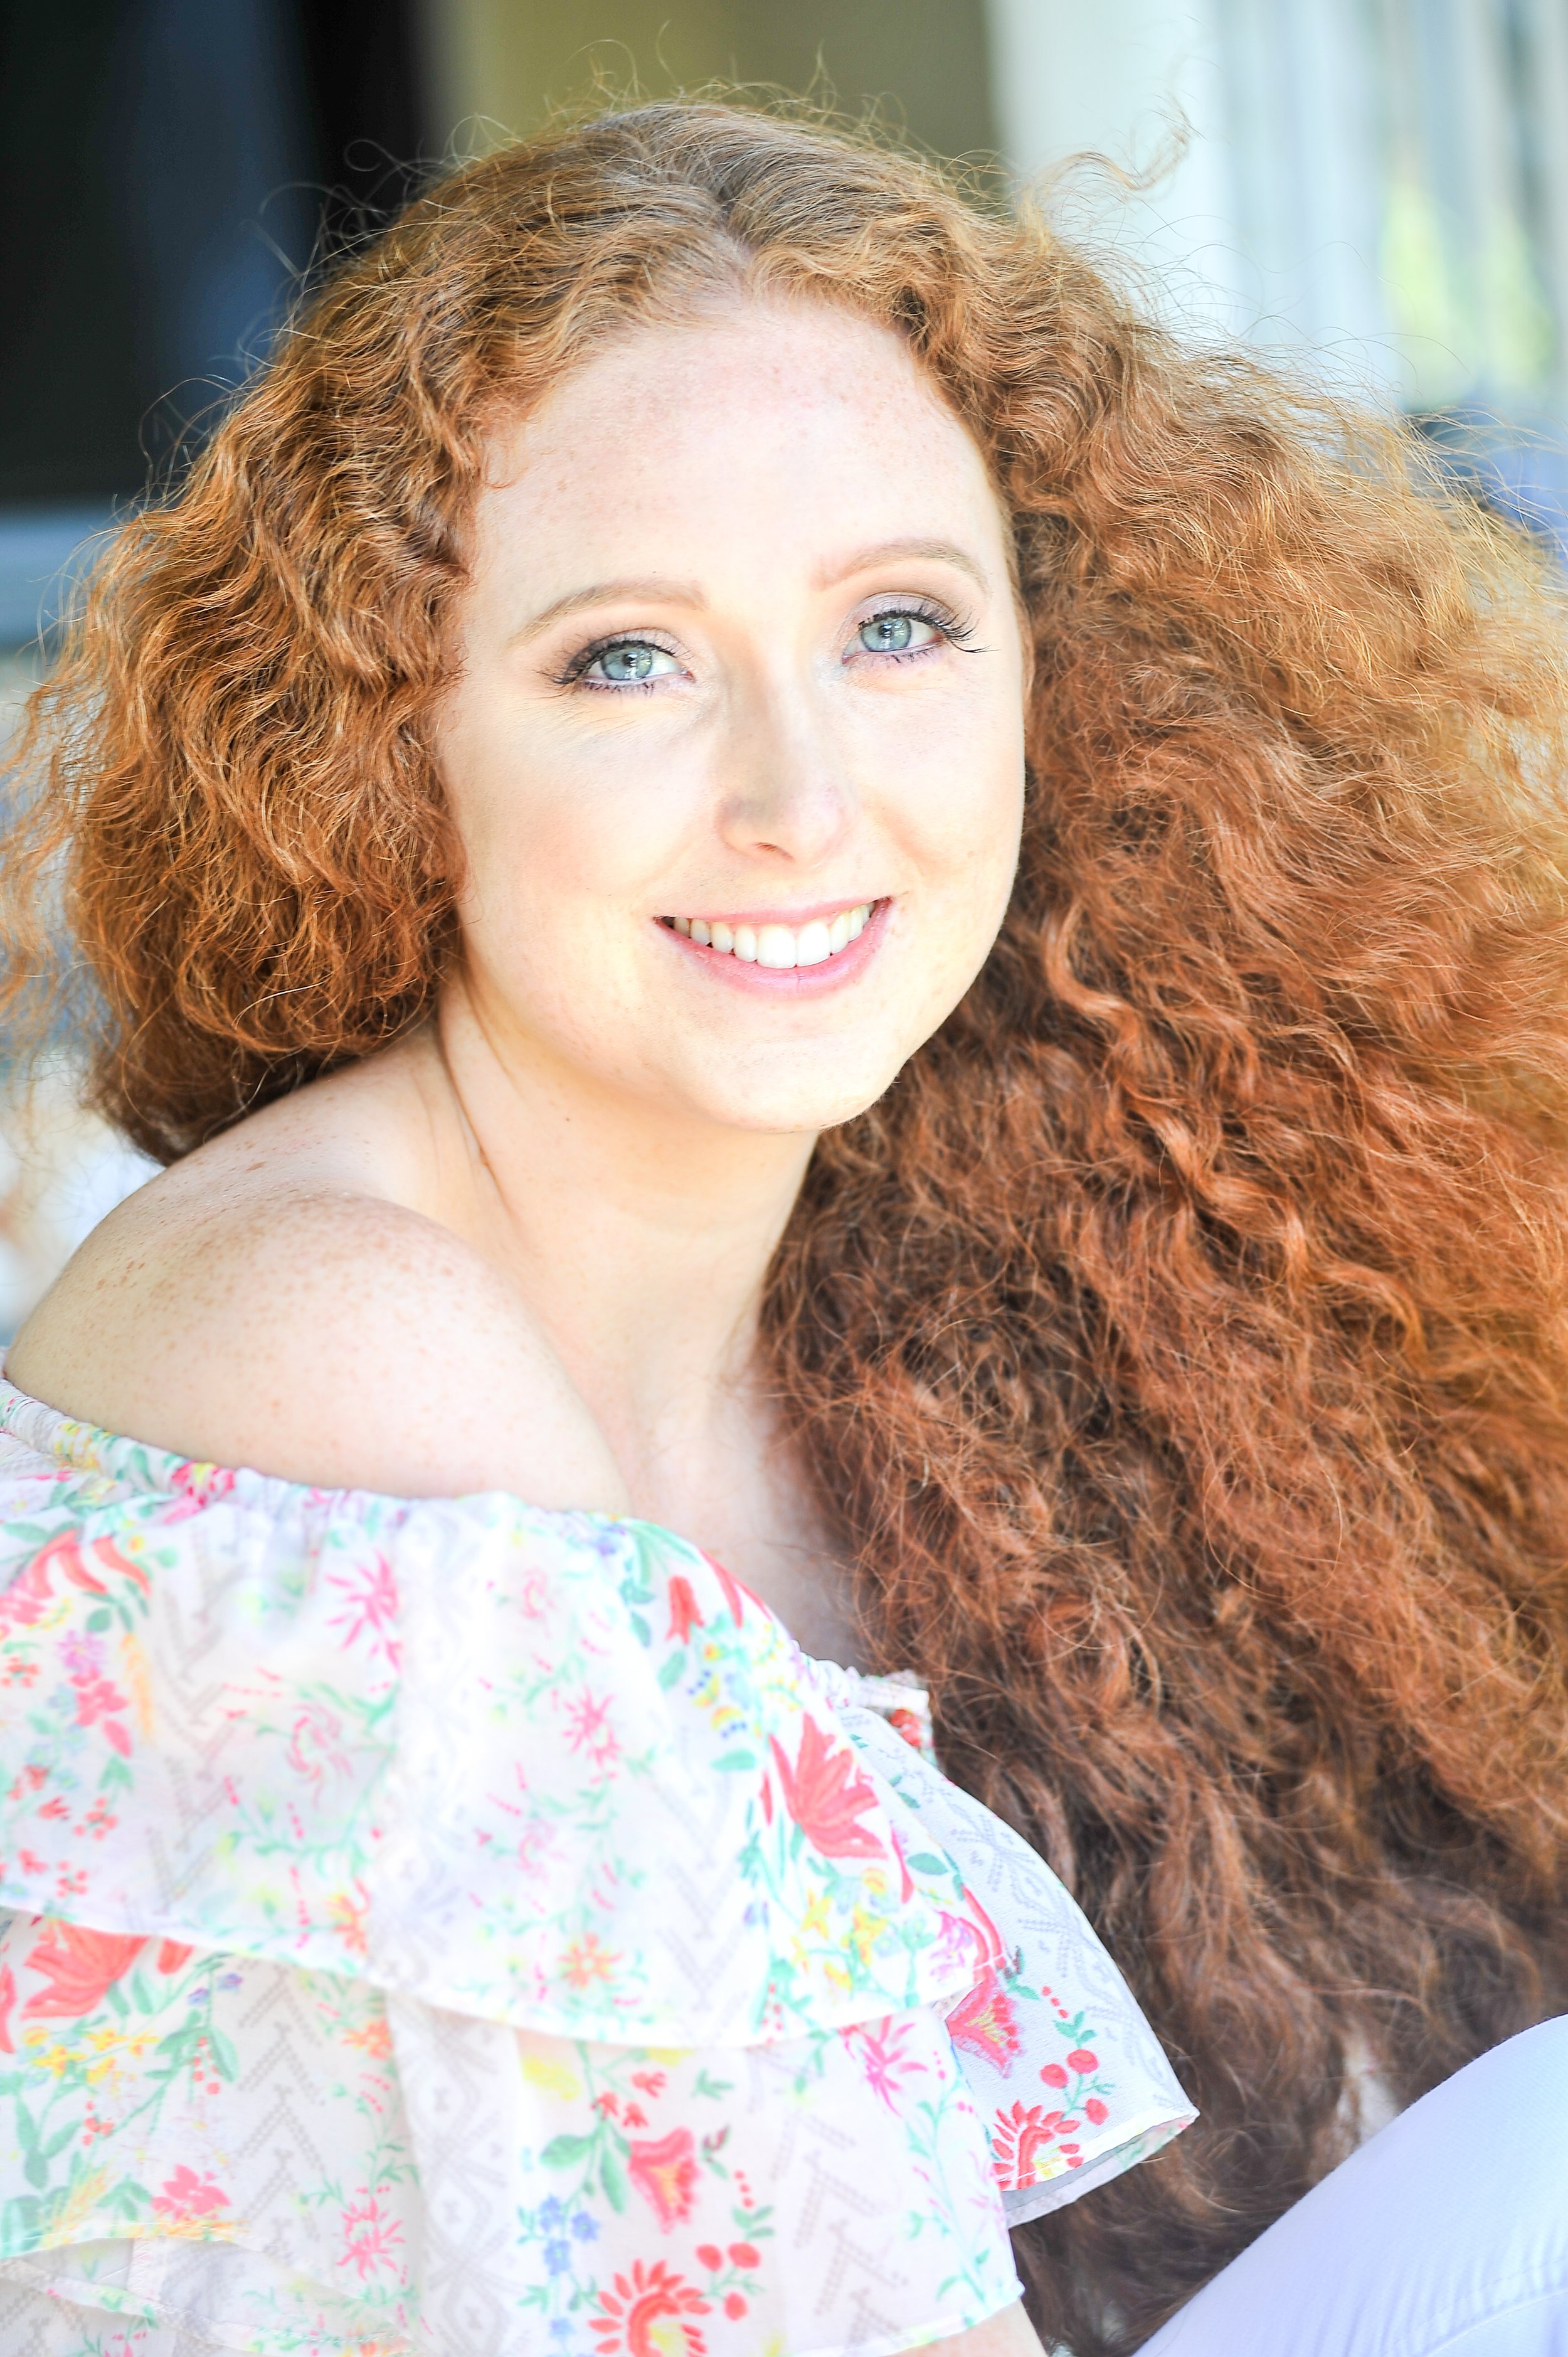 In this blog post, I am going to show you how to maintain frizzy curly hair. These are easy tips to tame frizz and care for your hair. After going through these curly hair tips, you’ll know how to treat frizzy curly hair and how to get rid of frizzy,